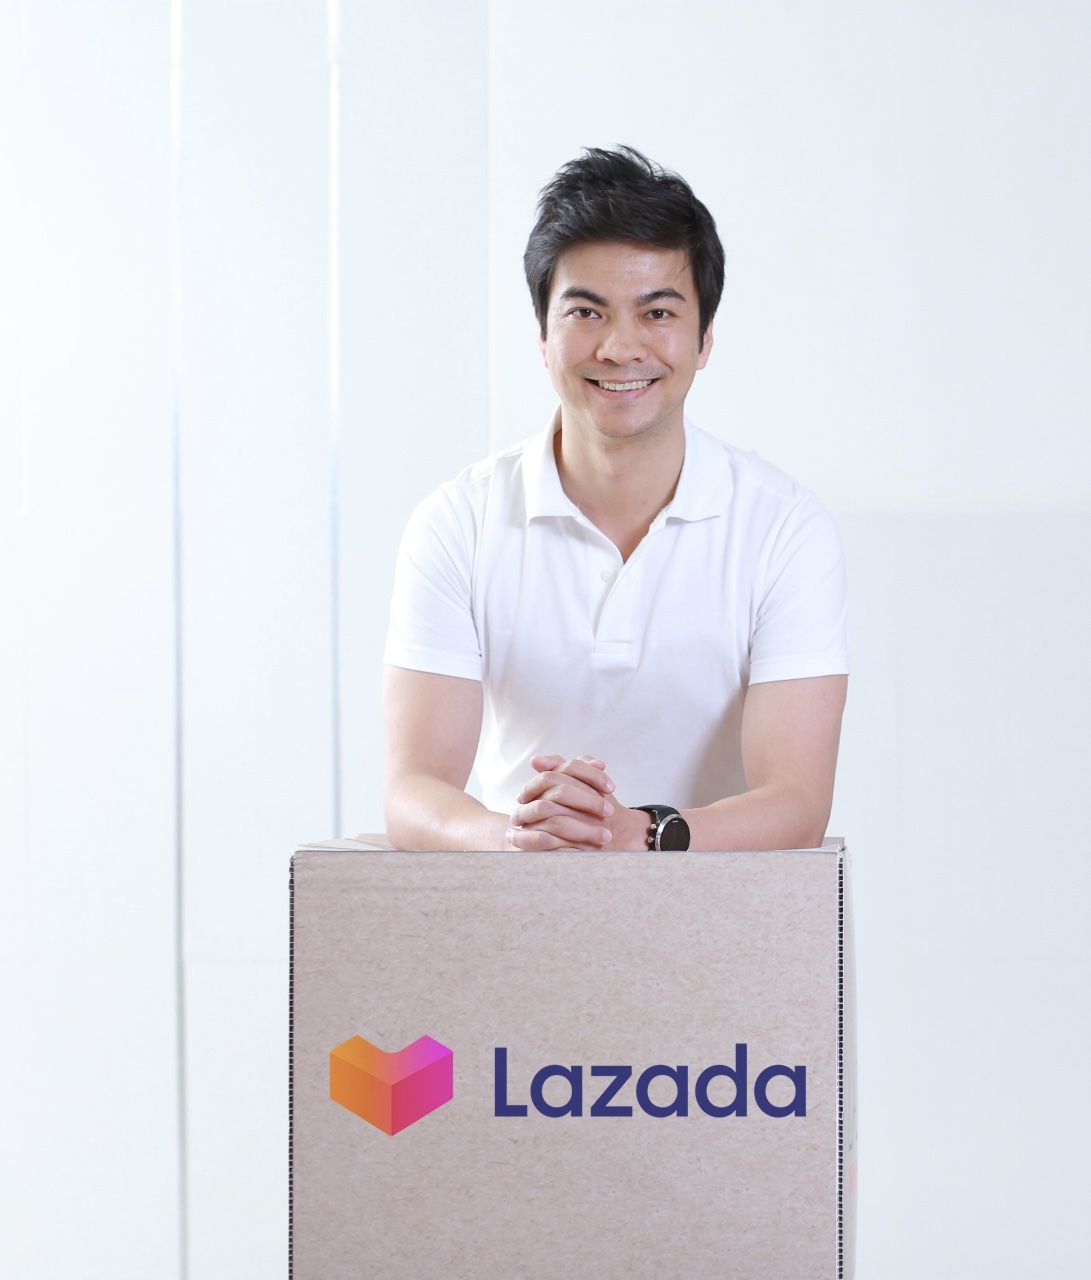 Lazada’s CEO in Thailand is also taking the lead on Vietnam operations